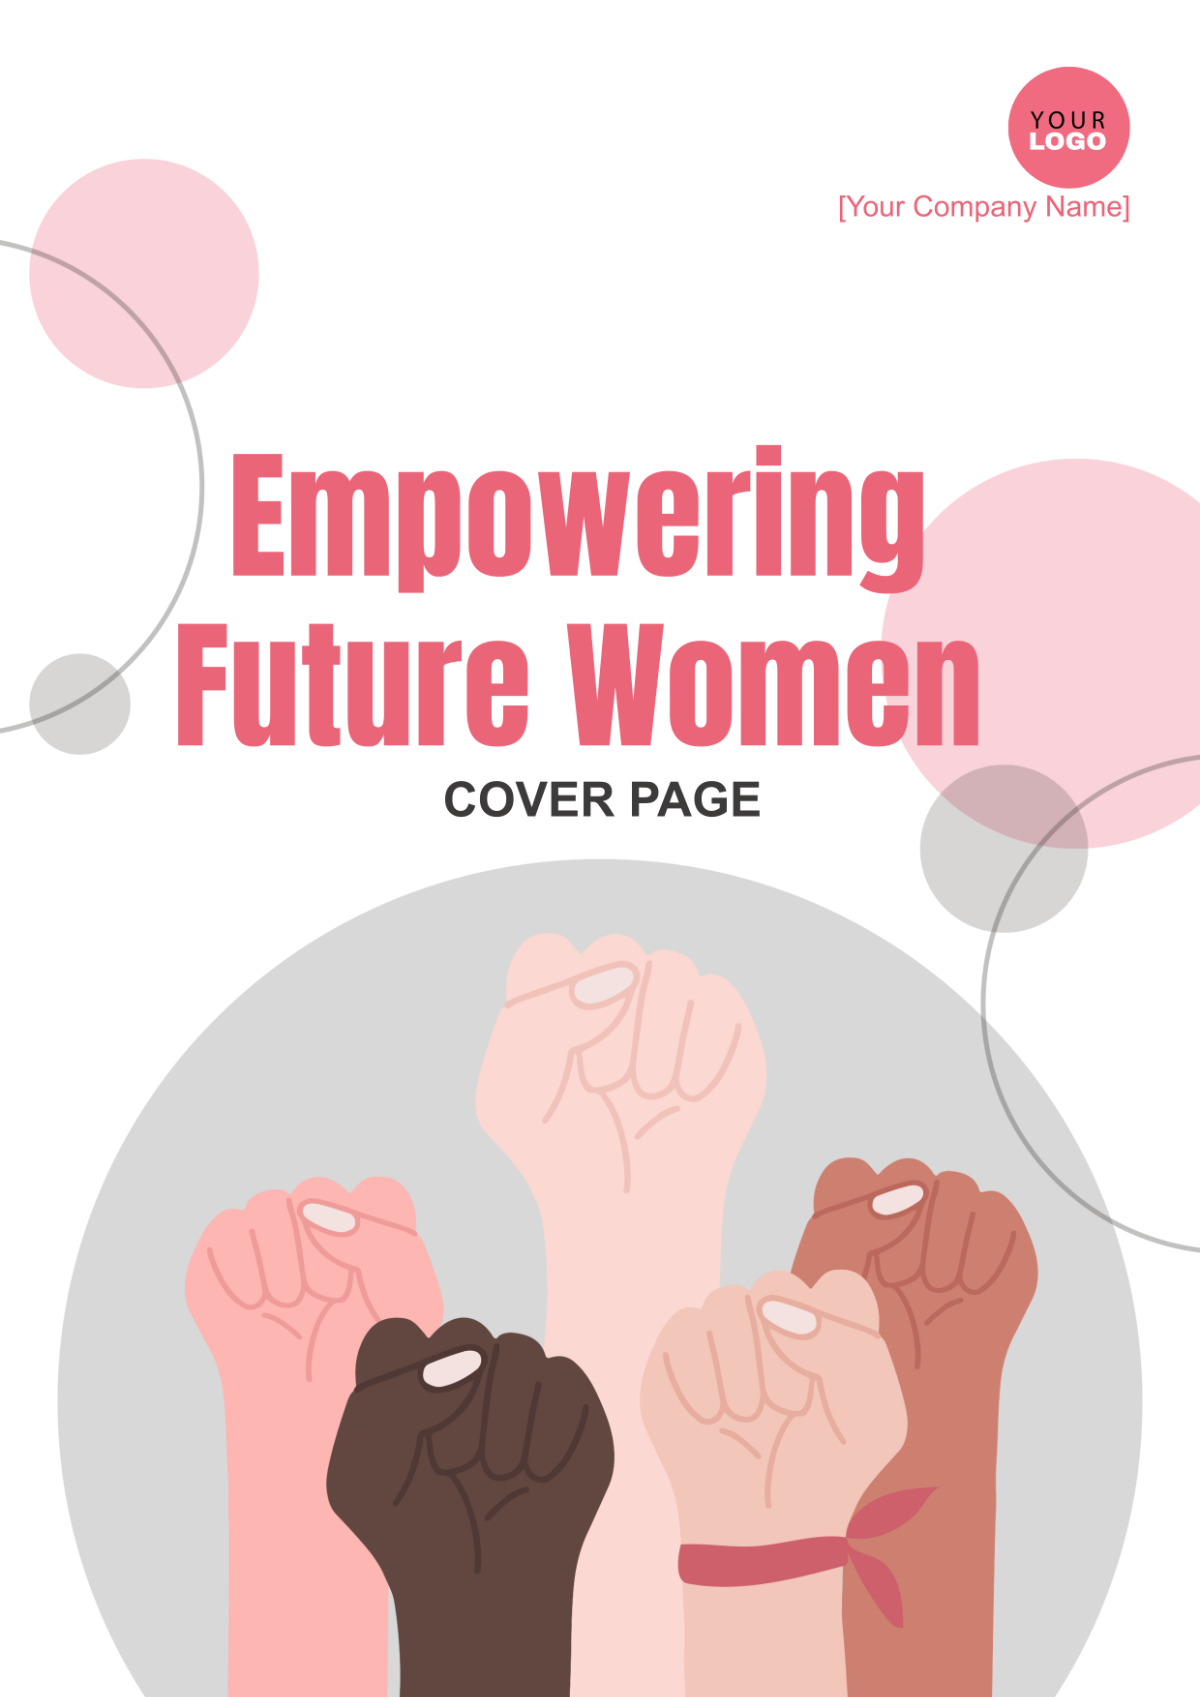 Empowering Future Women Cover Page